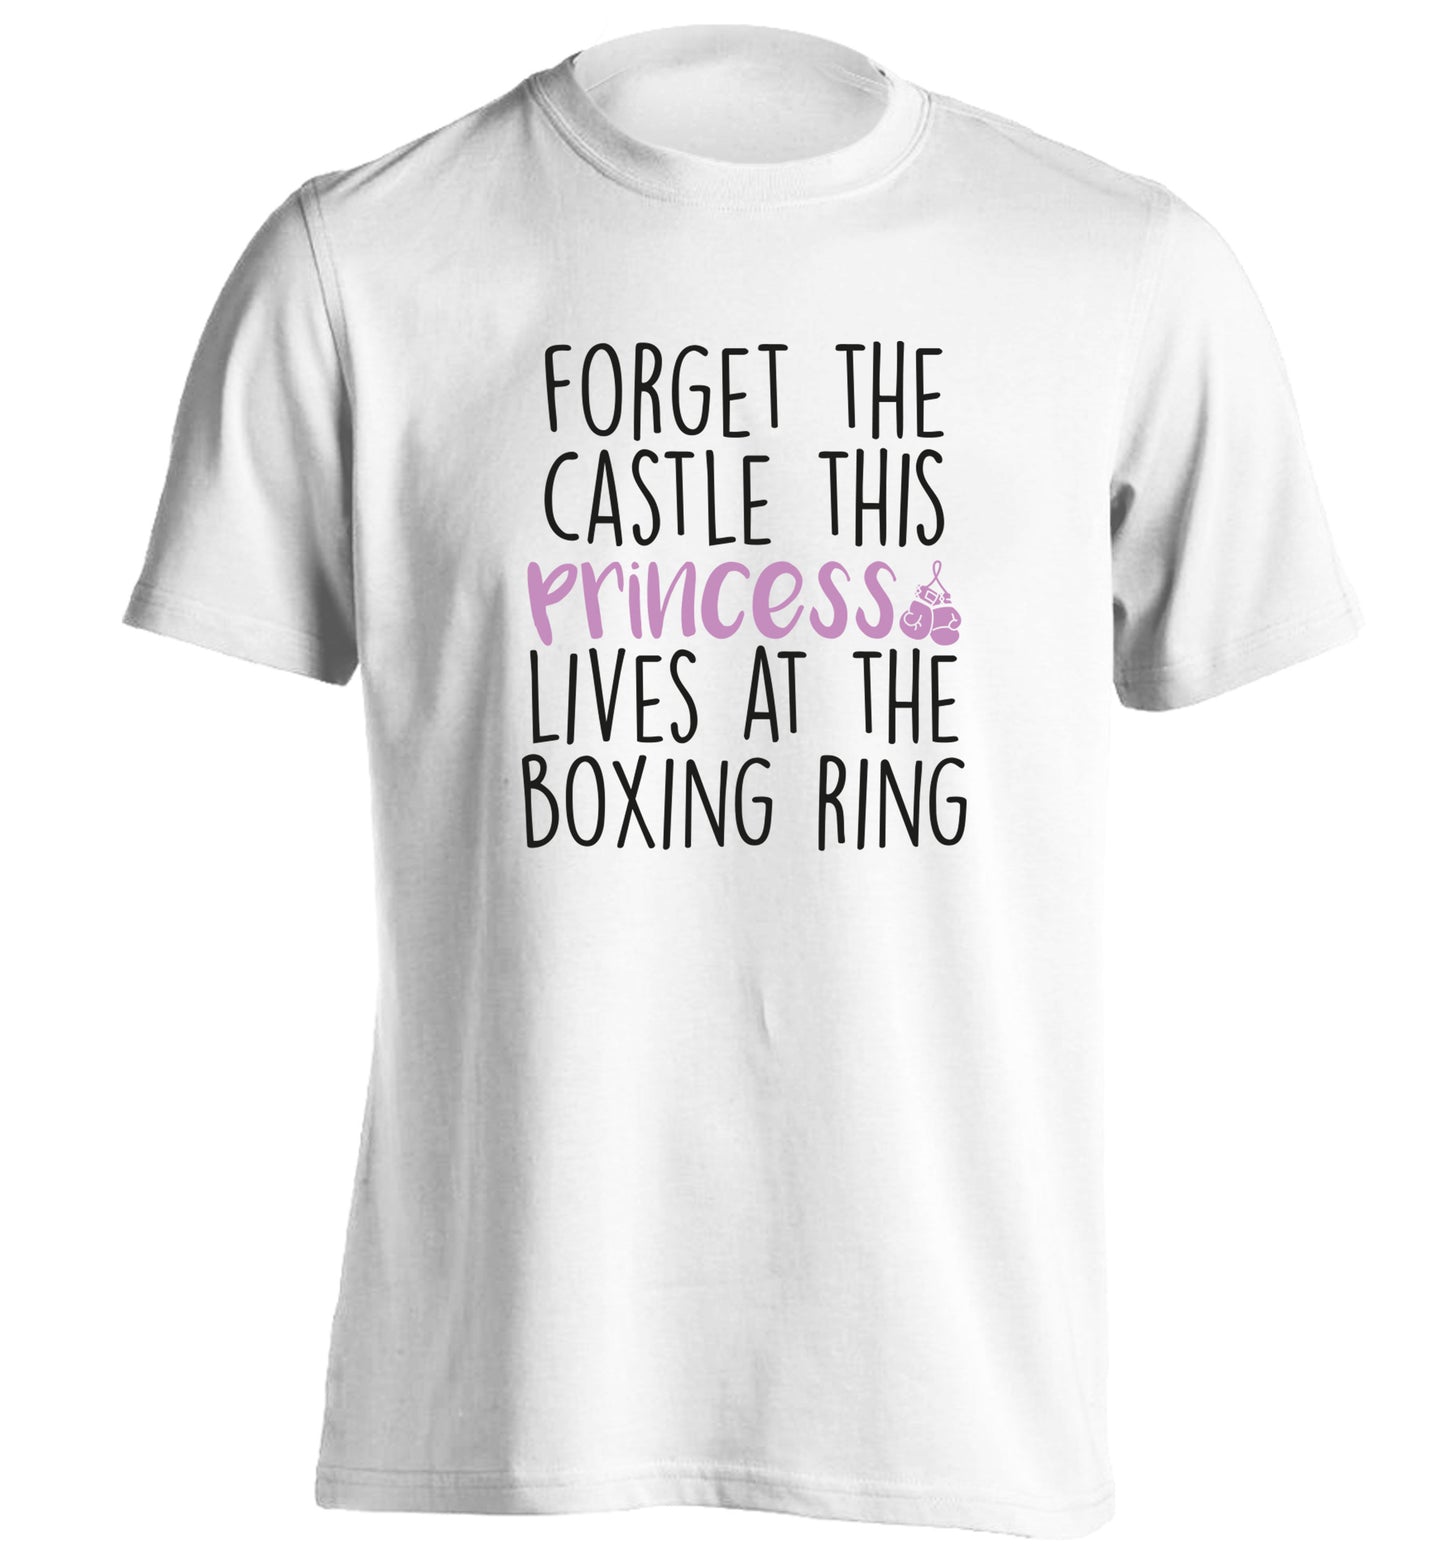 Forget the castle this princess lives at the boxing ring adults unisex white Tshirt 2XL